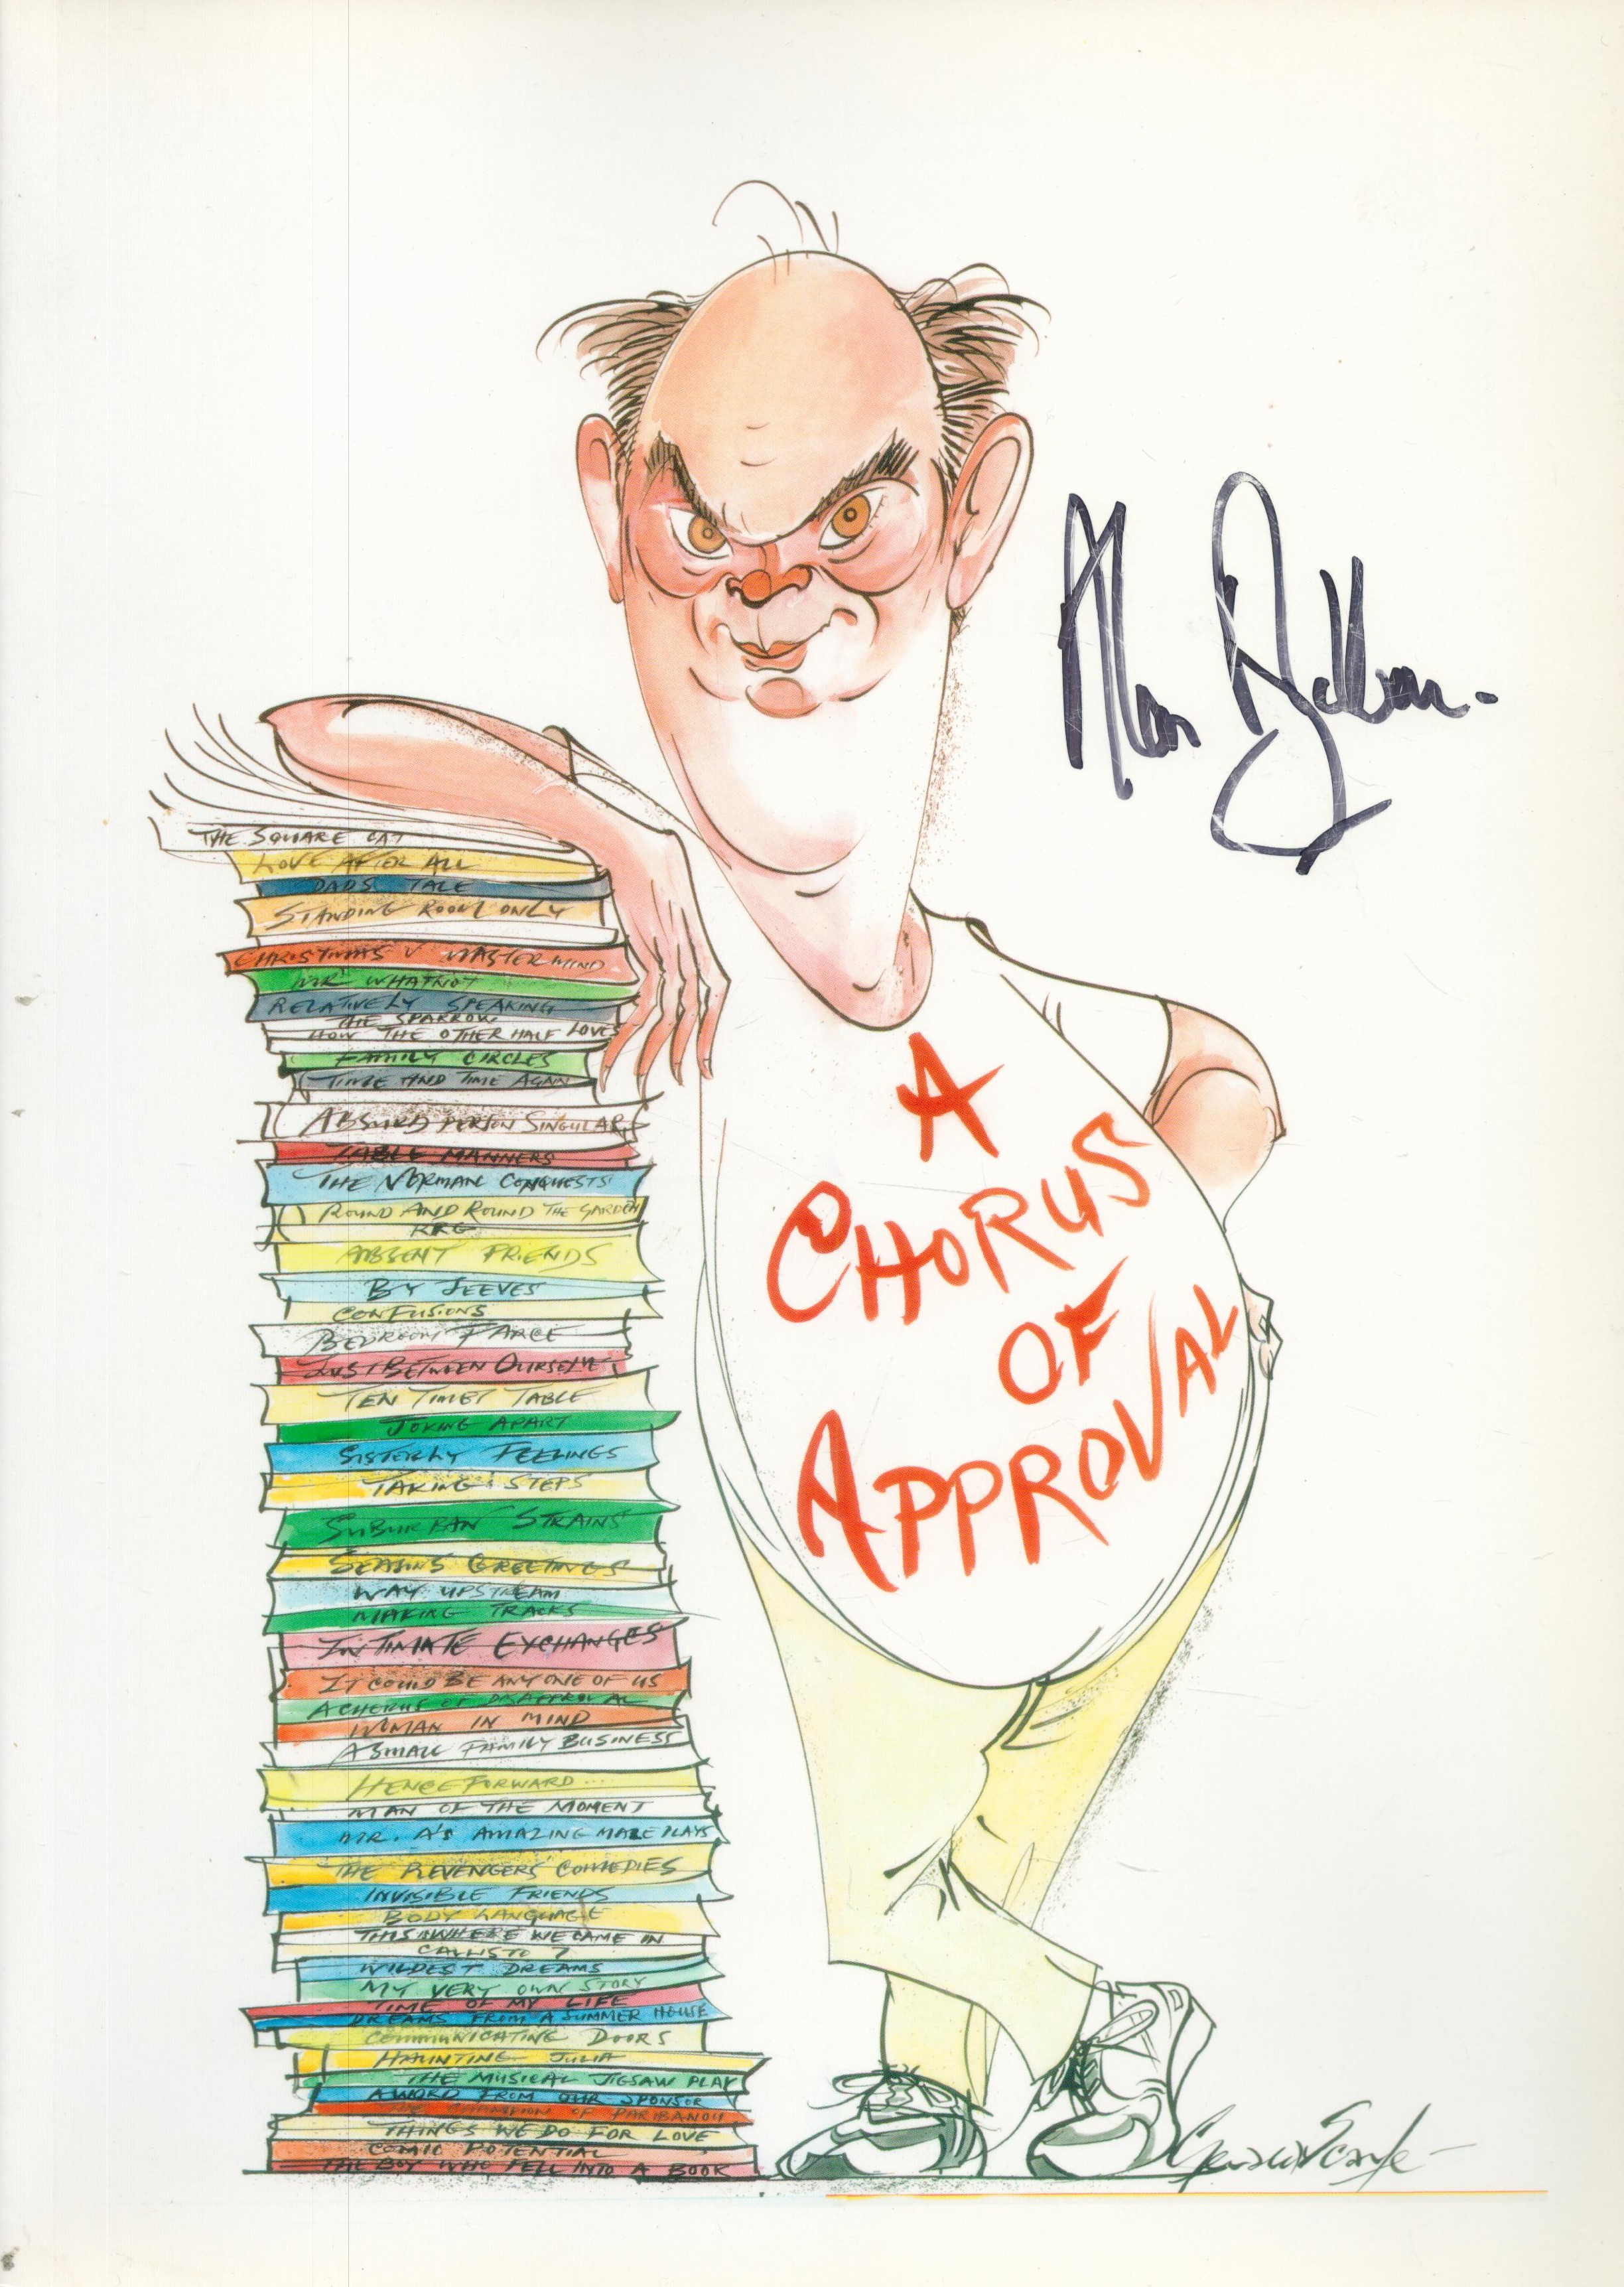 British playwright Sir Alan Ayckbourn Signed on A Chorus of Approval Magazine. Signed Clearly in